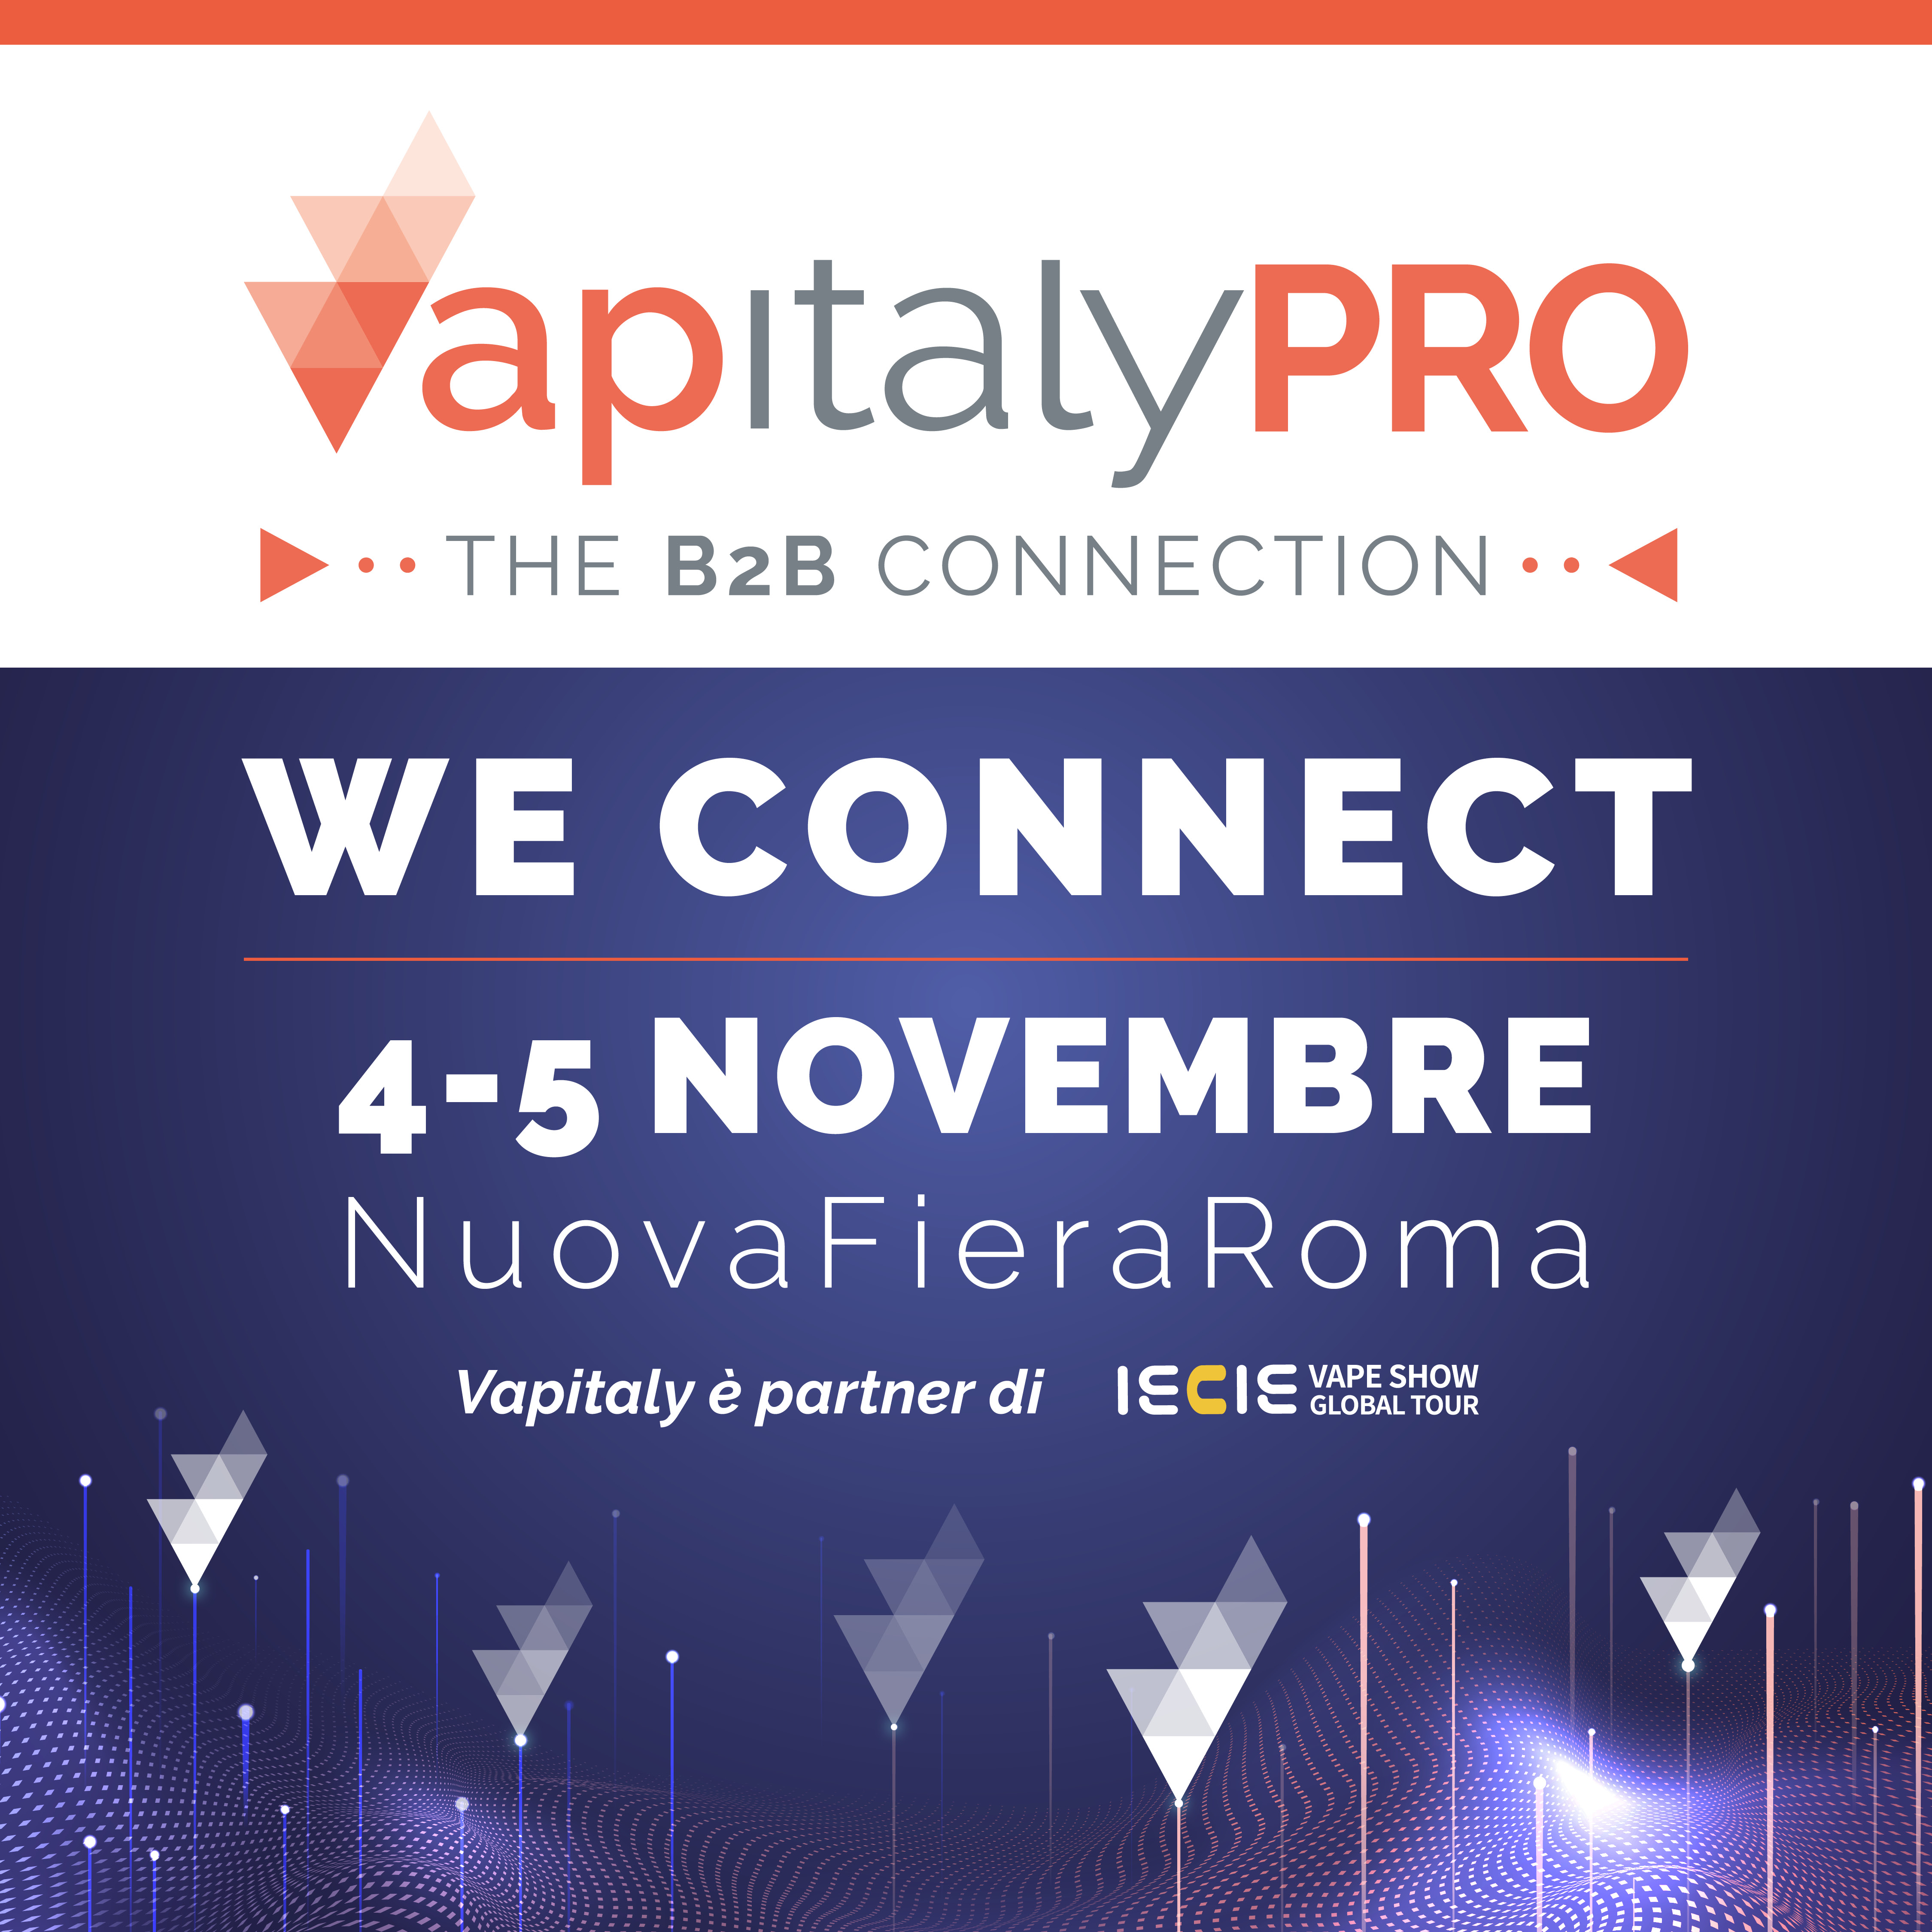 International trends and new frontiers of business. All set for VapitalyPRO 2023